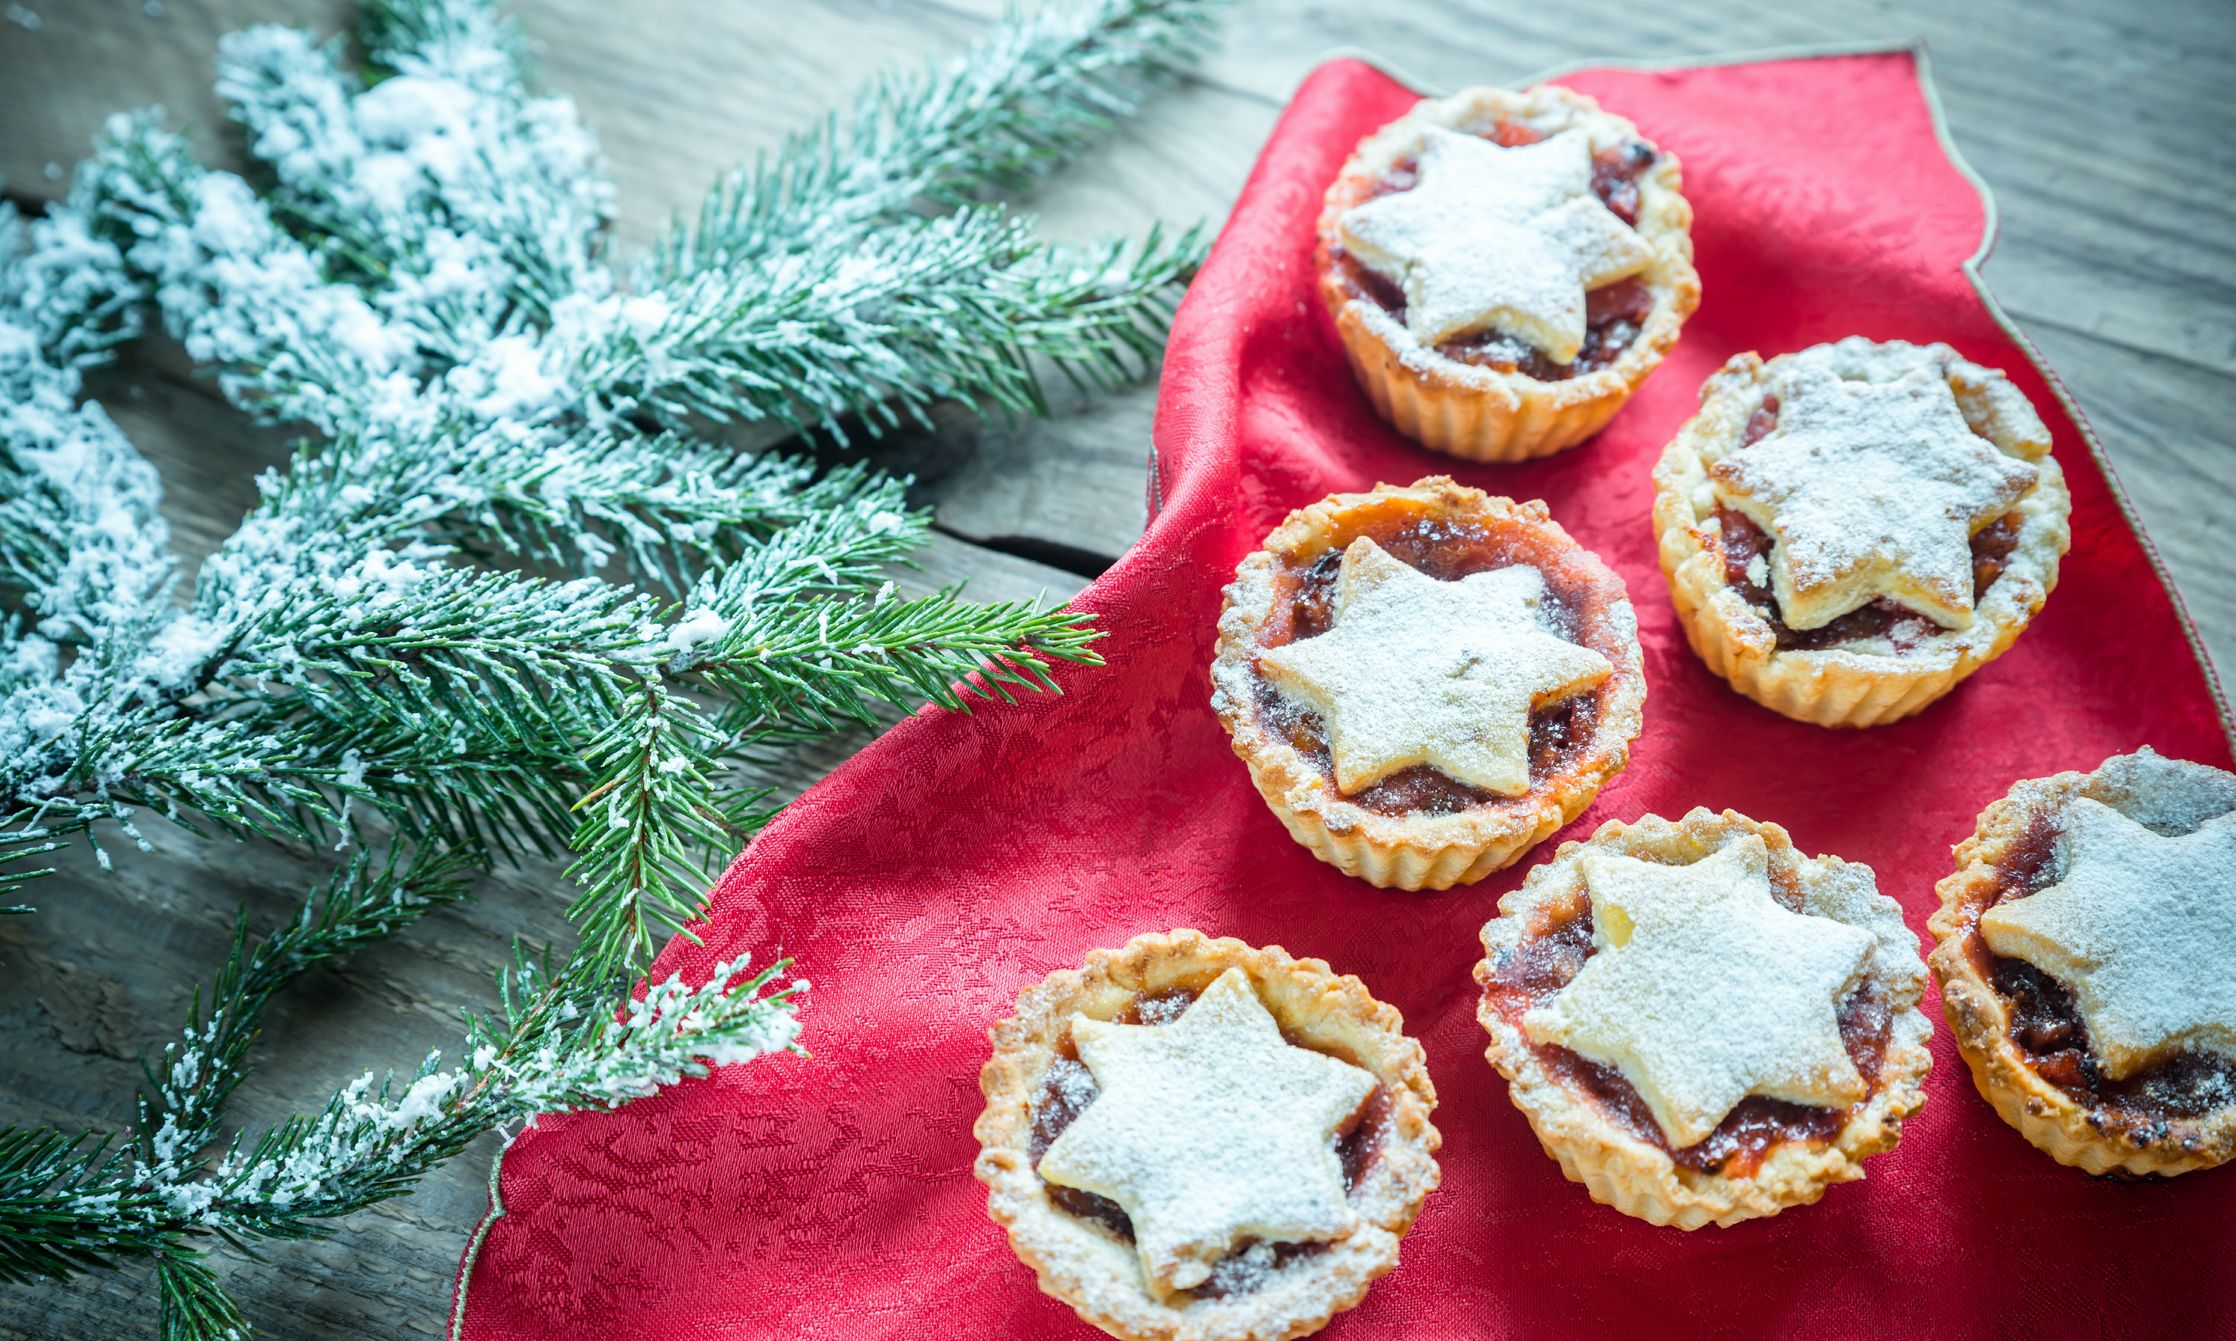 mince-pies-with-christmas-tree-branch-royalty-free-image-499402474-1543331680.jpg